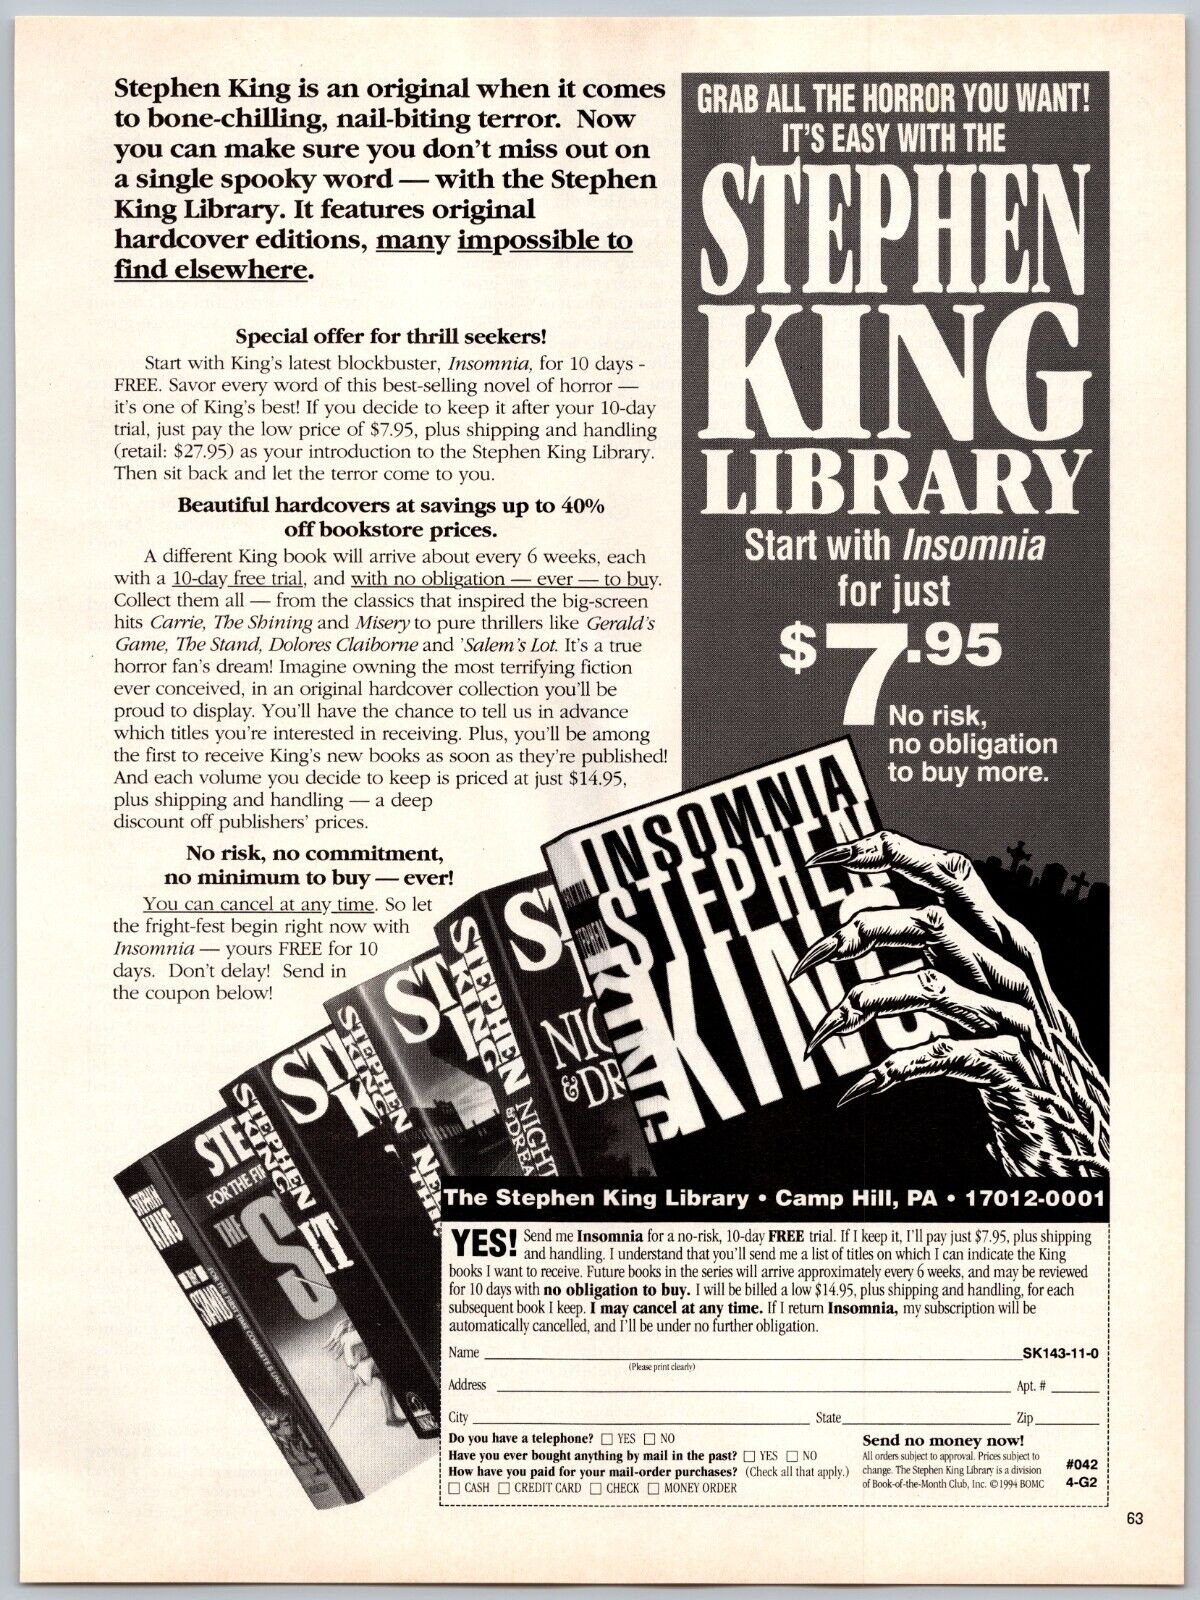 Stephen King Book Library Start With Insomnia Nov, 1994 Full Page Print Ad